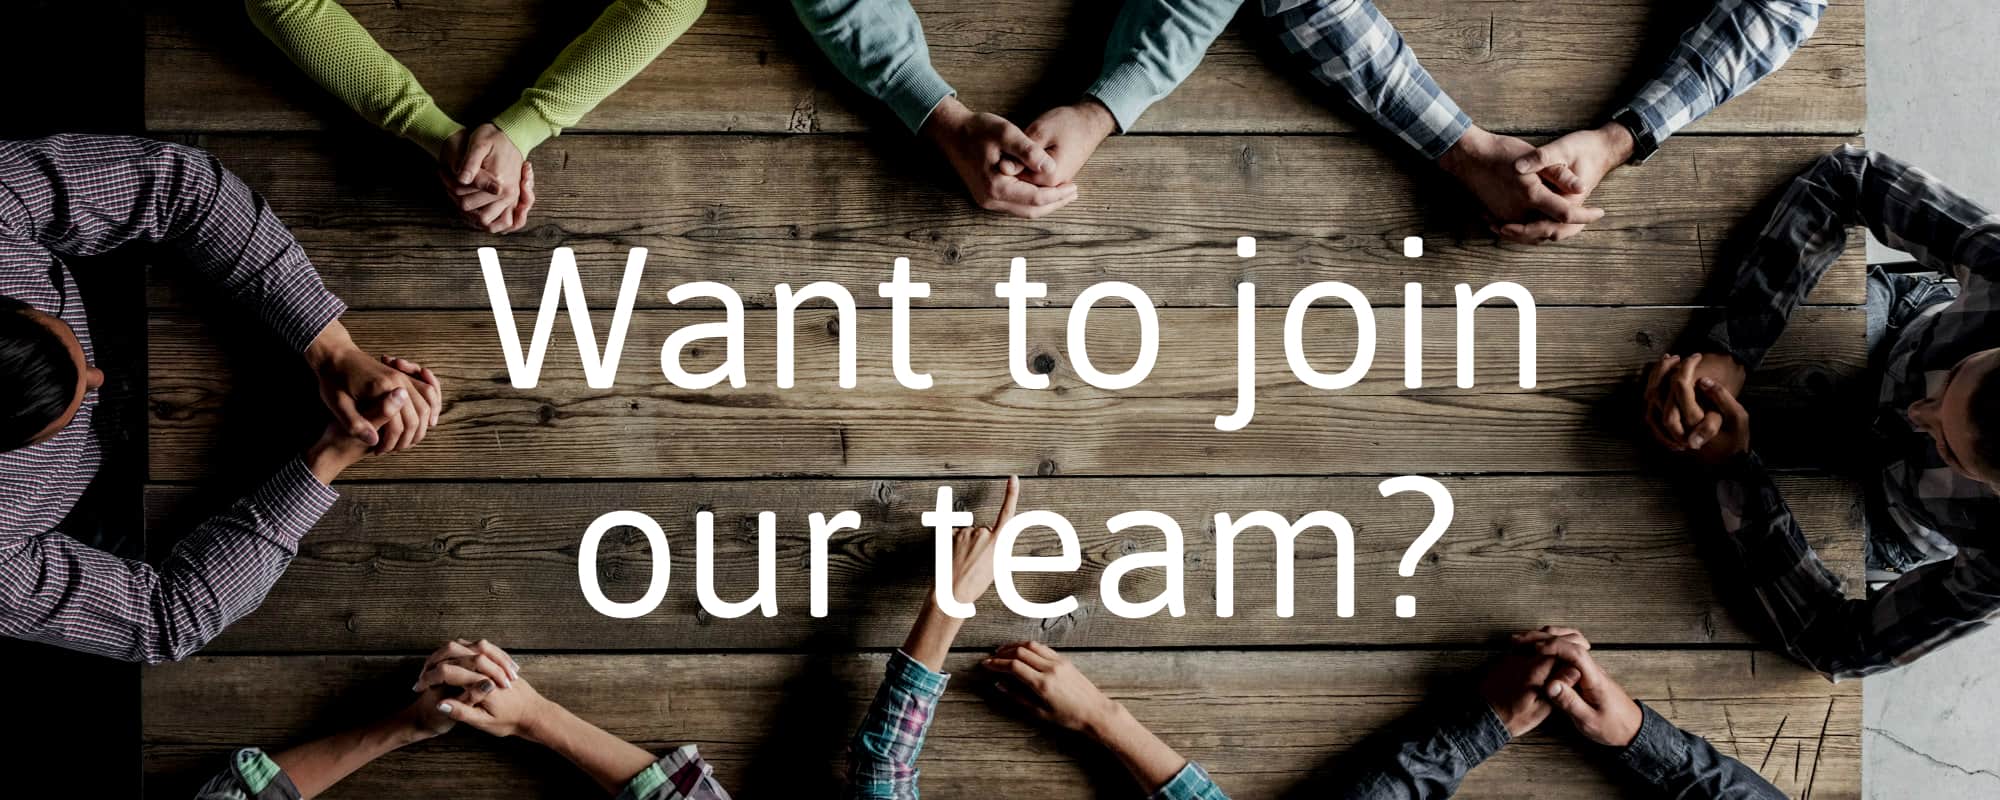 Want to join our team?